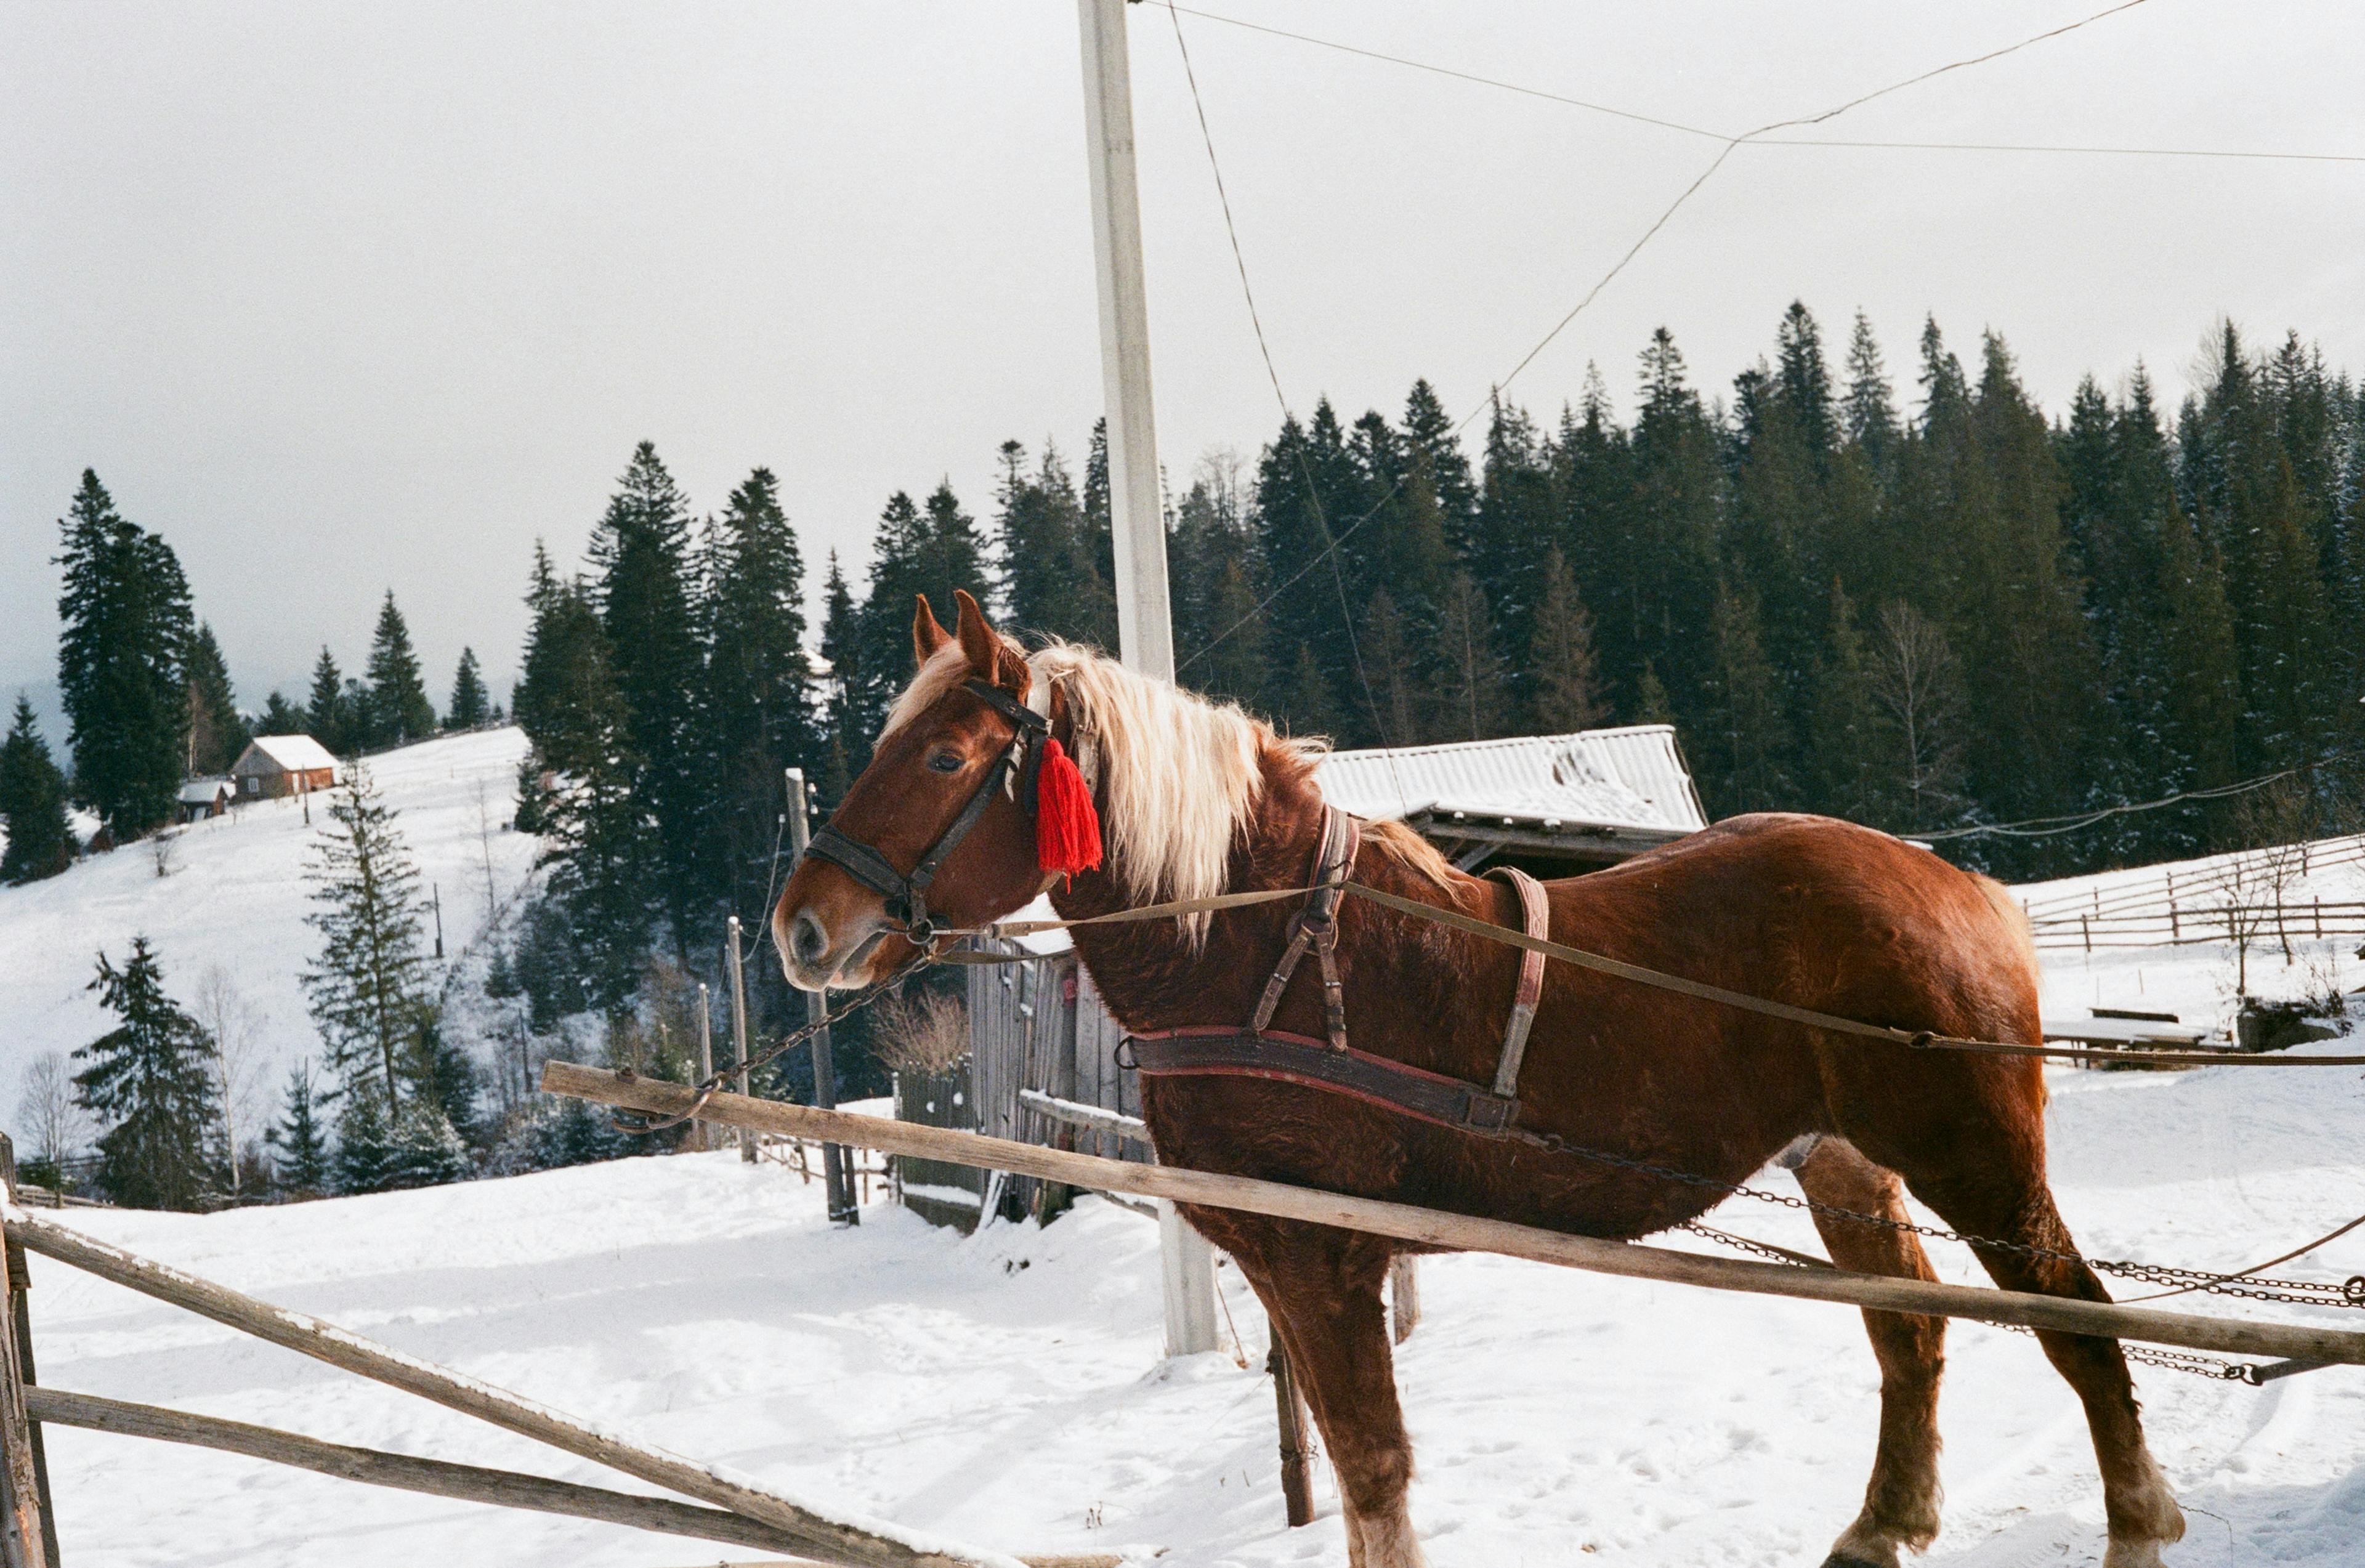 Horse waiting in snow to take people on a ride